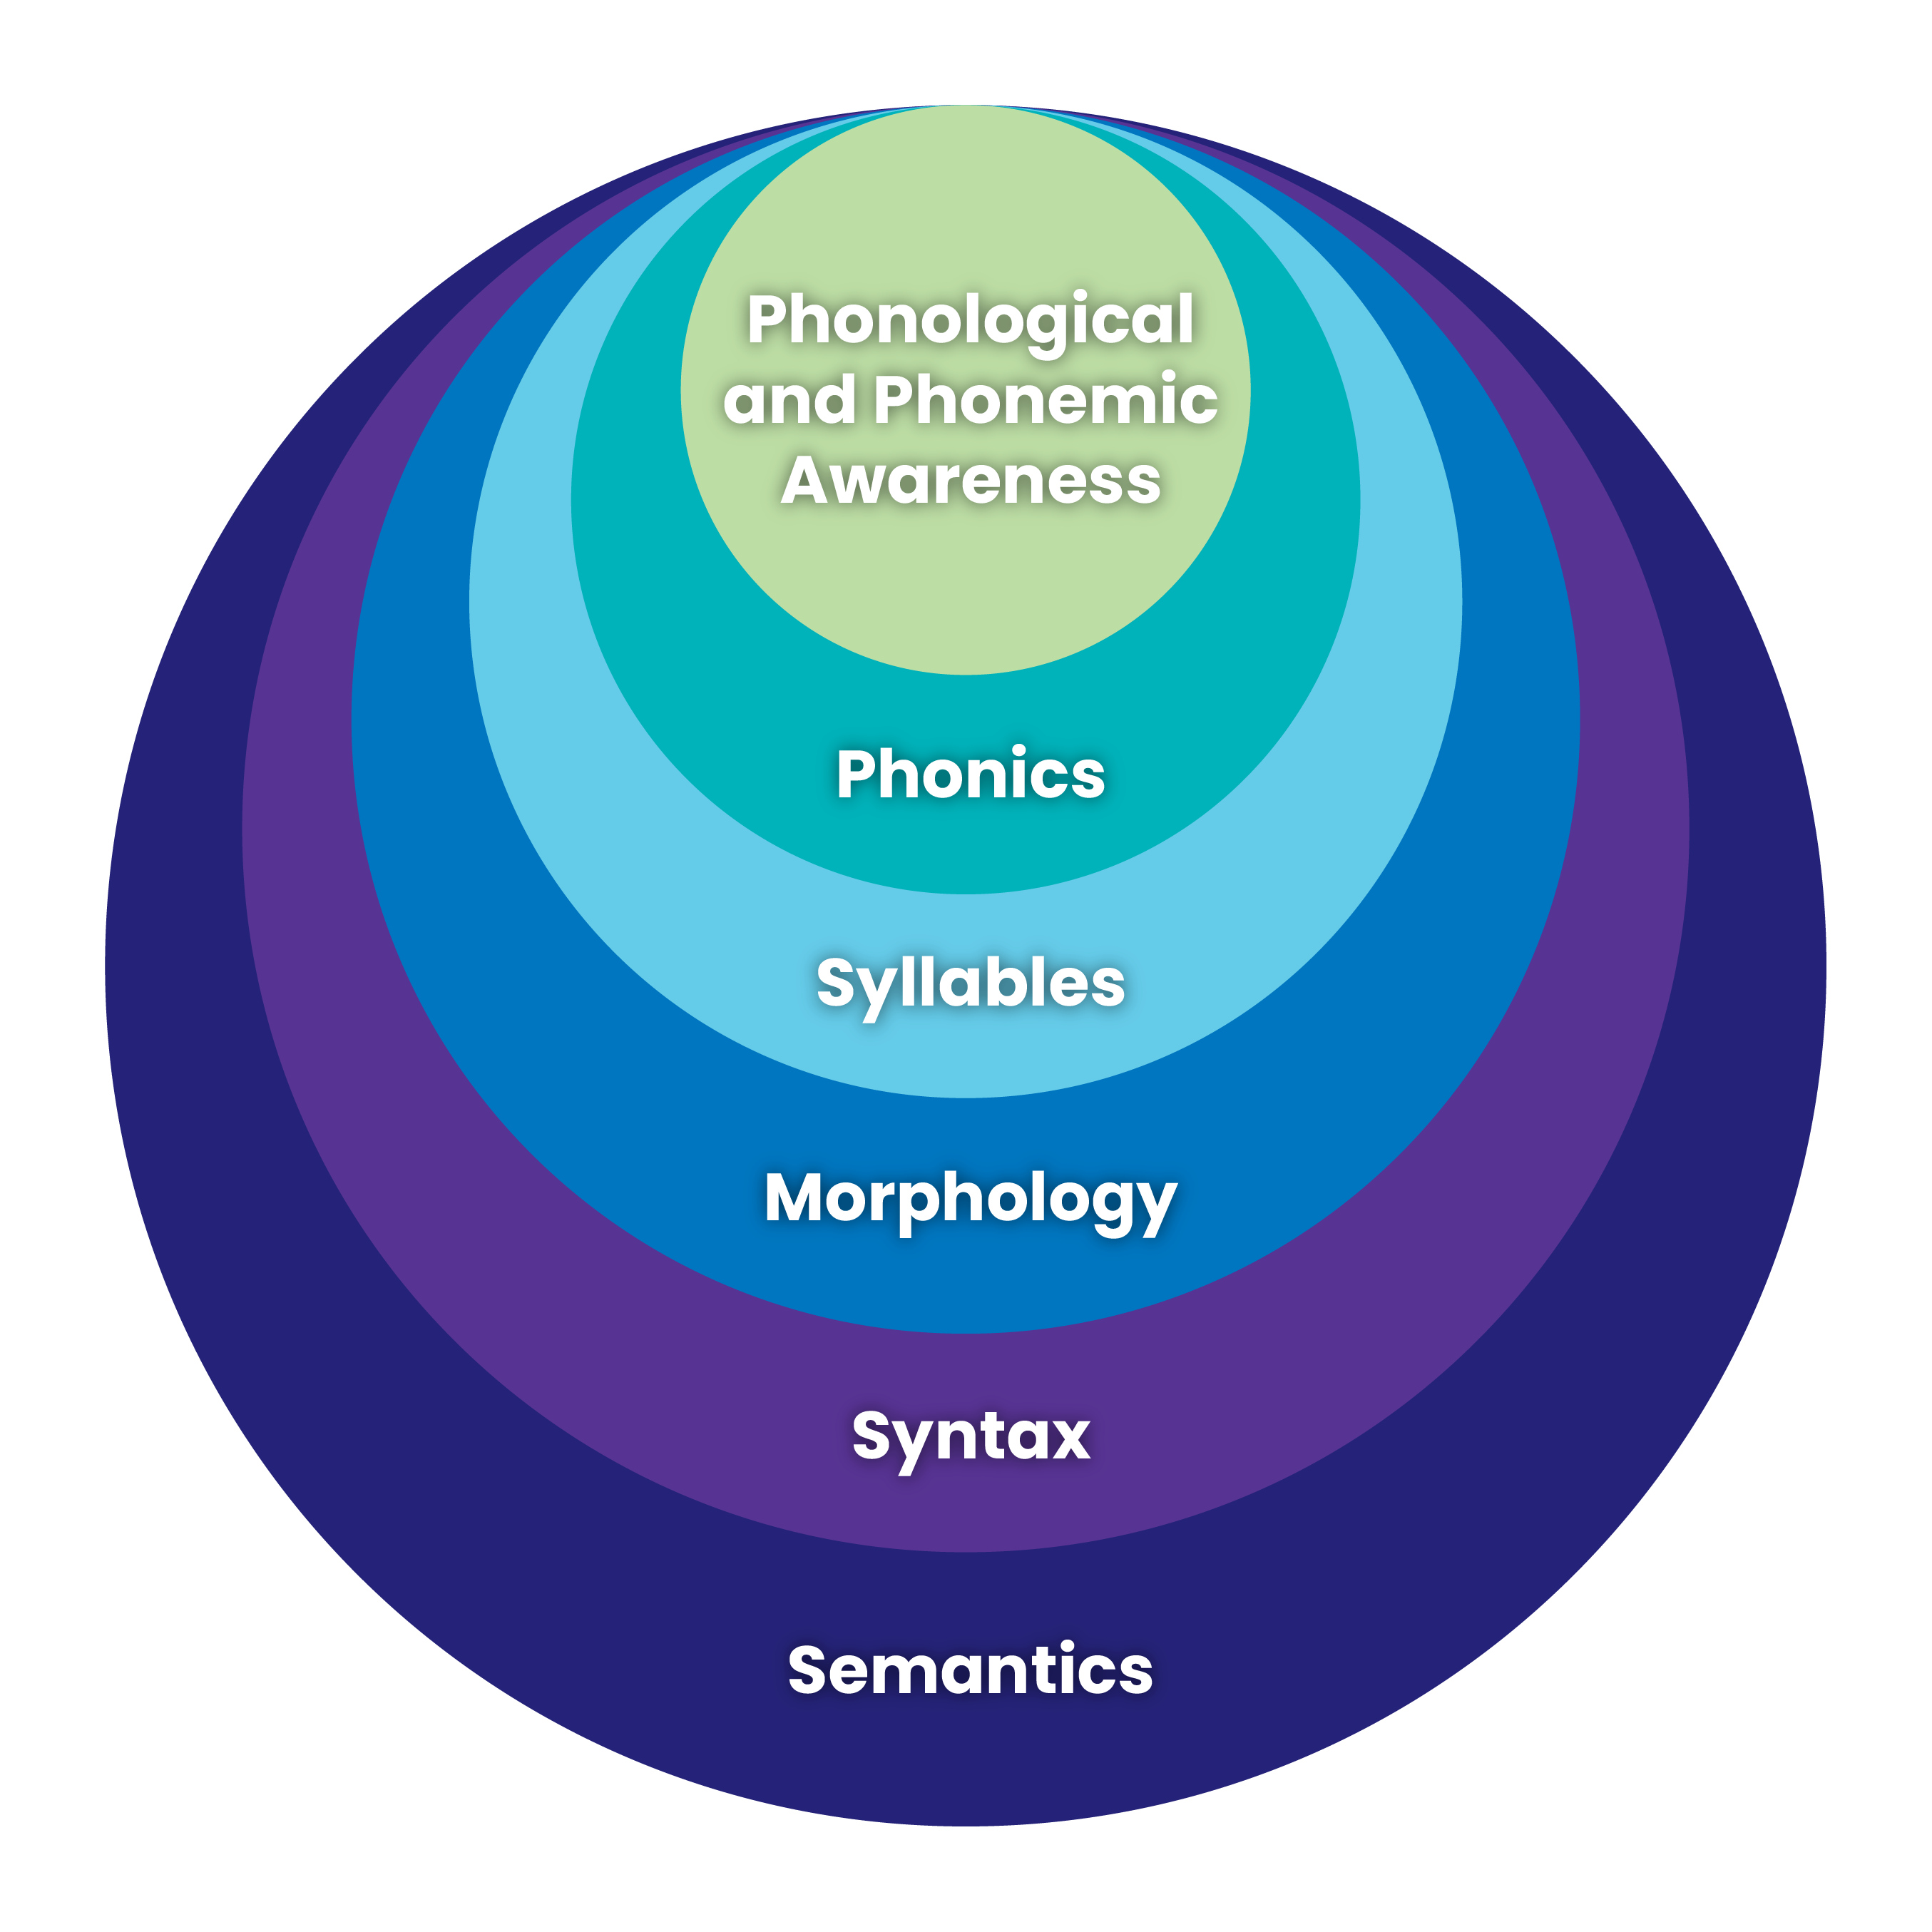 structured literacy includes explicit instruction in fundamental reading skills, including phonological and phonemic awareness, phonics, syllables, morphology, syntax, and semantics.